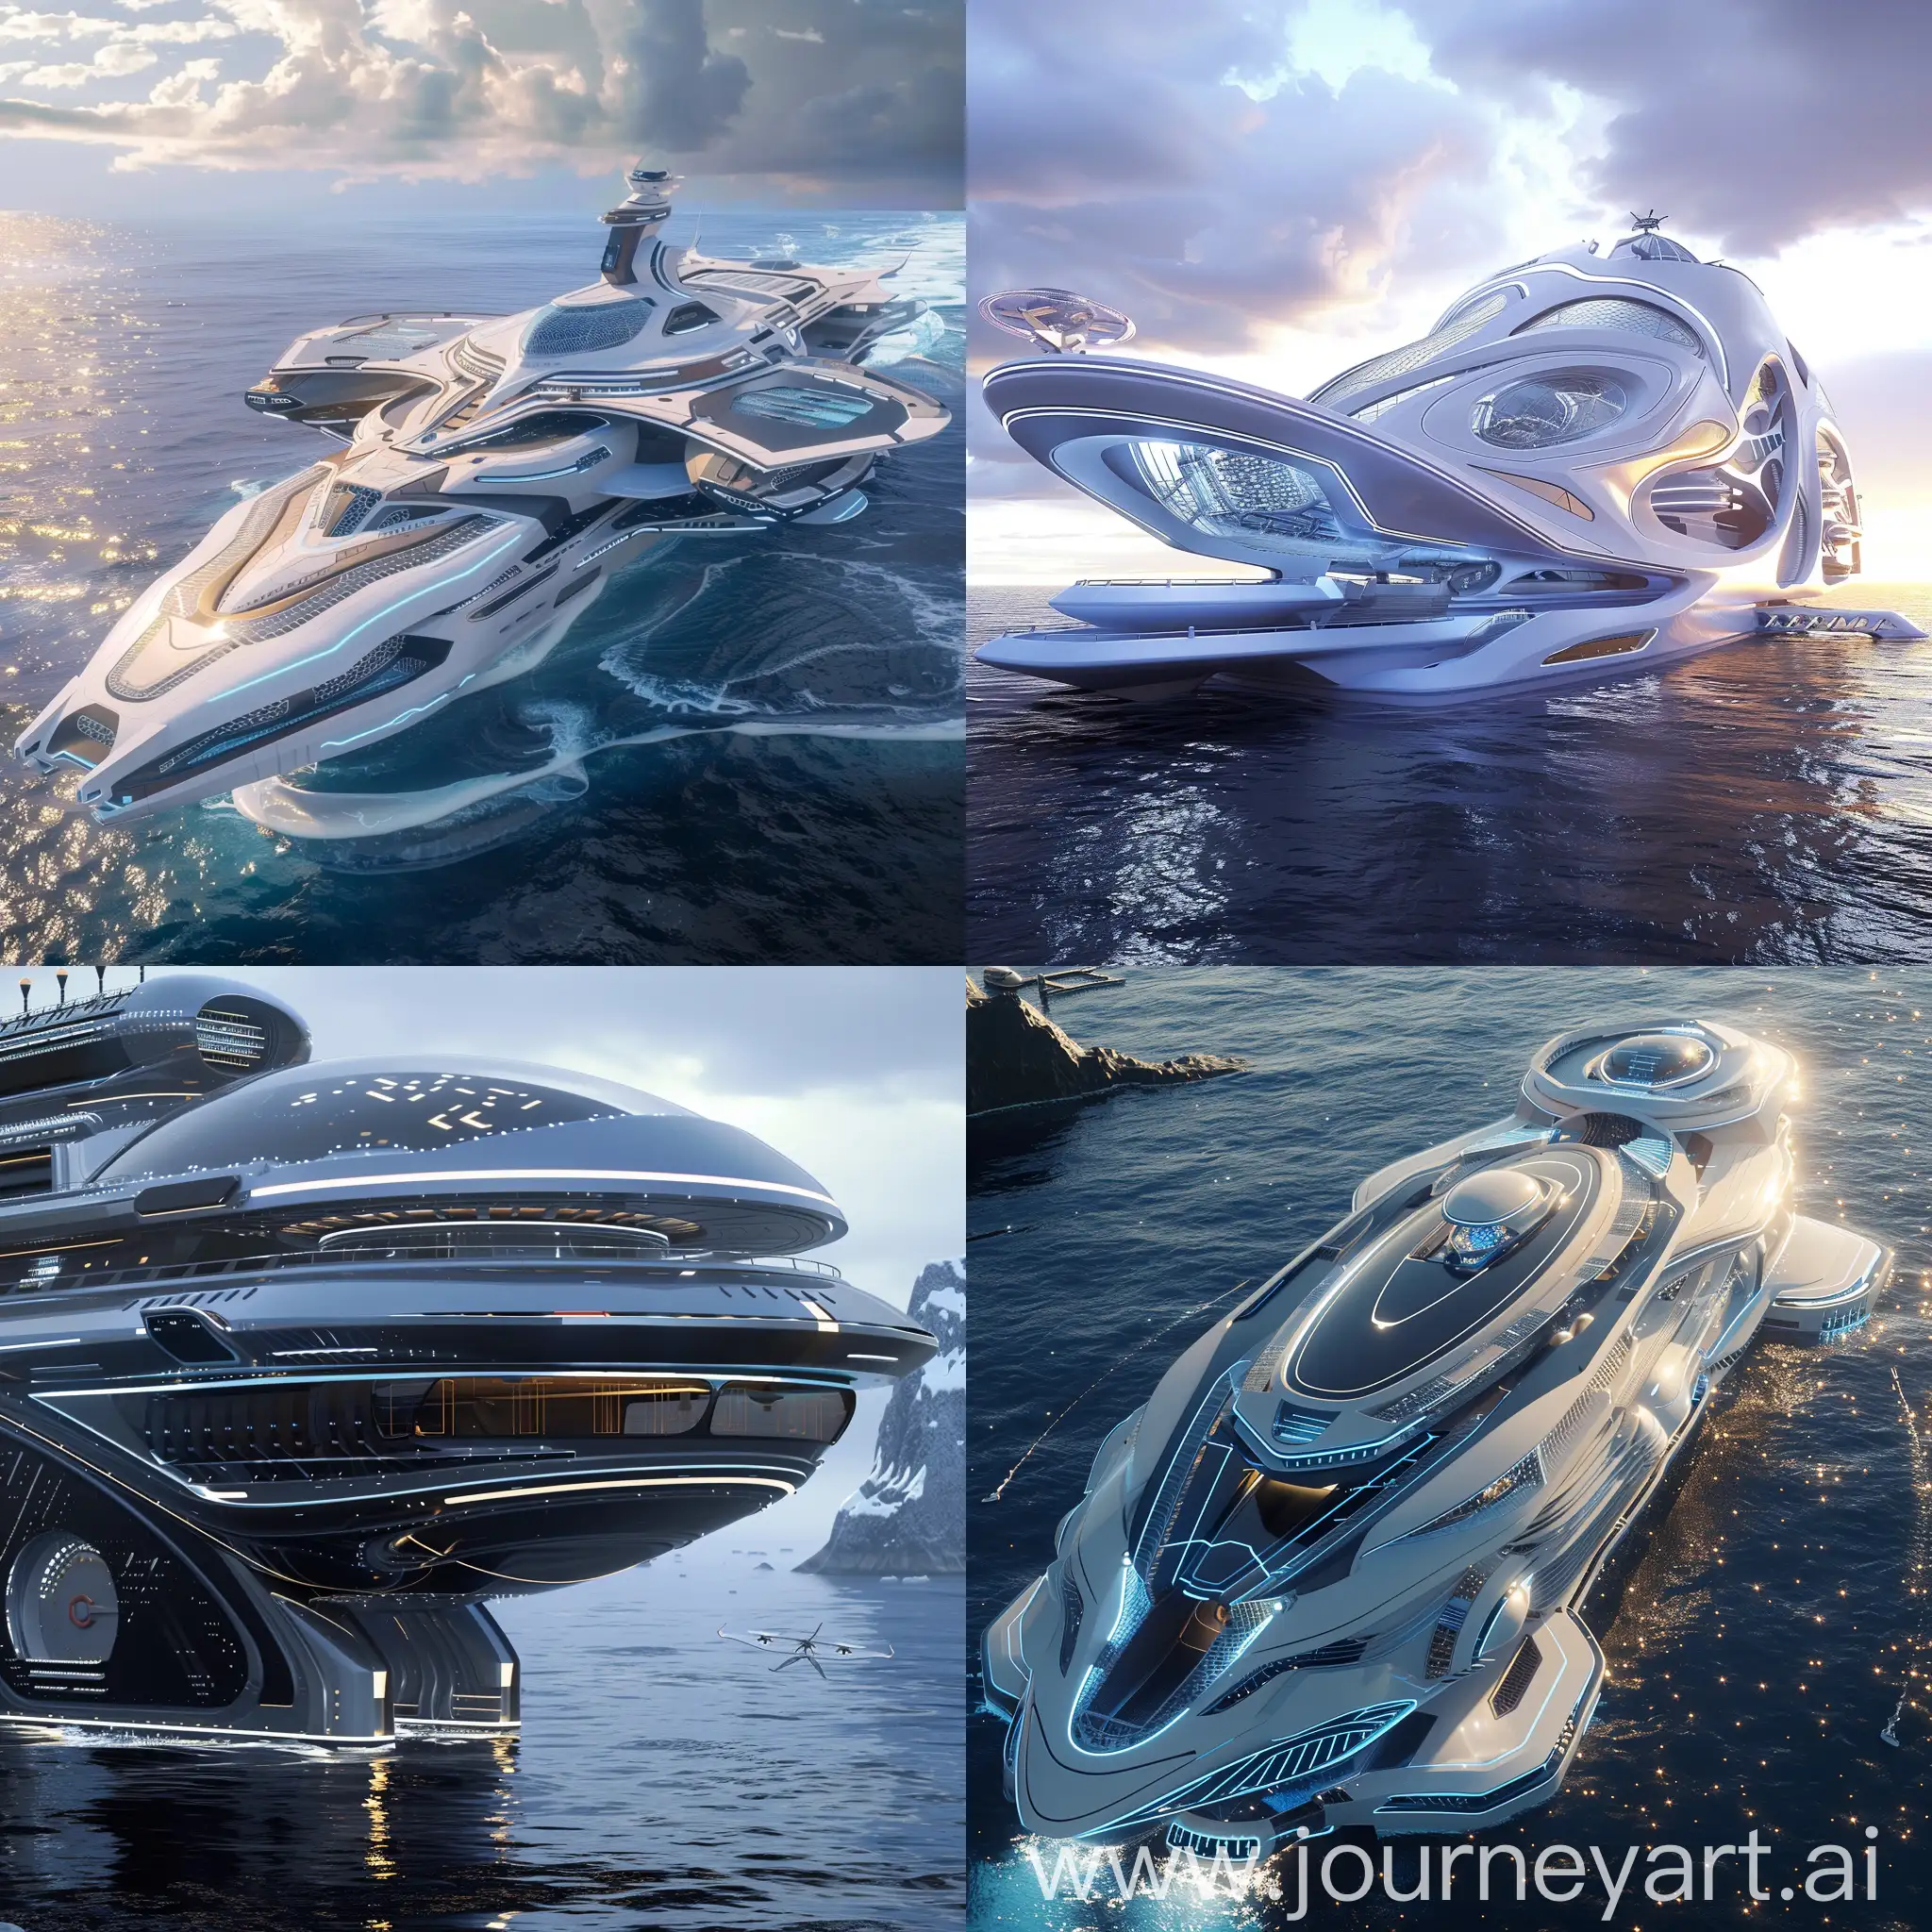 Sci-Fi cruise ship, Advanced Science and Technology, Energy-Efficient Propulsion Systems, AI-Integrated Navigation, Sustainable Energy Sources, Advanced Waste Management, Smart Hull Designs, Exotechnology Integration, Virtual Reality Entertainment, High-Touch Personalization, Robotics and Automation, Health and Wellness Tech, Aerodynamic Shape, Holographic Displays, Advanced Materials, Adaptive Camouflage, Drone Deployment System, Energy Harvesting Surfaces, Retractable Solar Sails, Aquatic Research Labs, Underwater Viewing Areas, Interactive Exteriors, Unreal Engine 5, Autodesk Maya, Autodesk 3Ds Max --stylize 1000